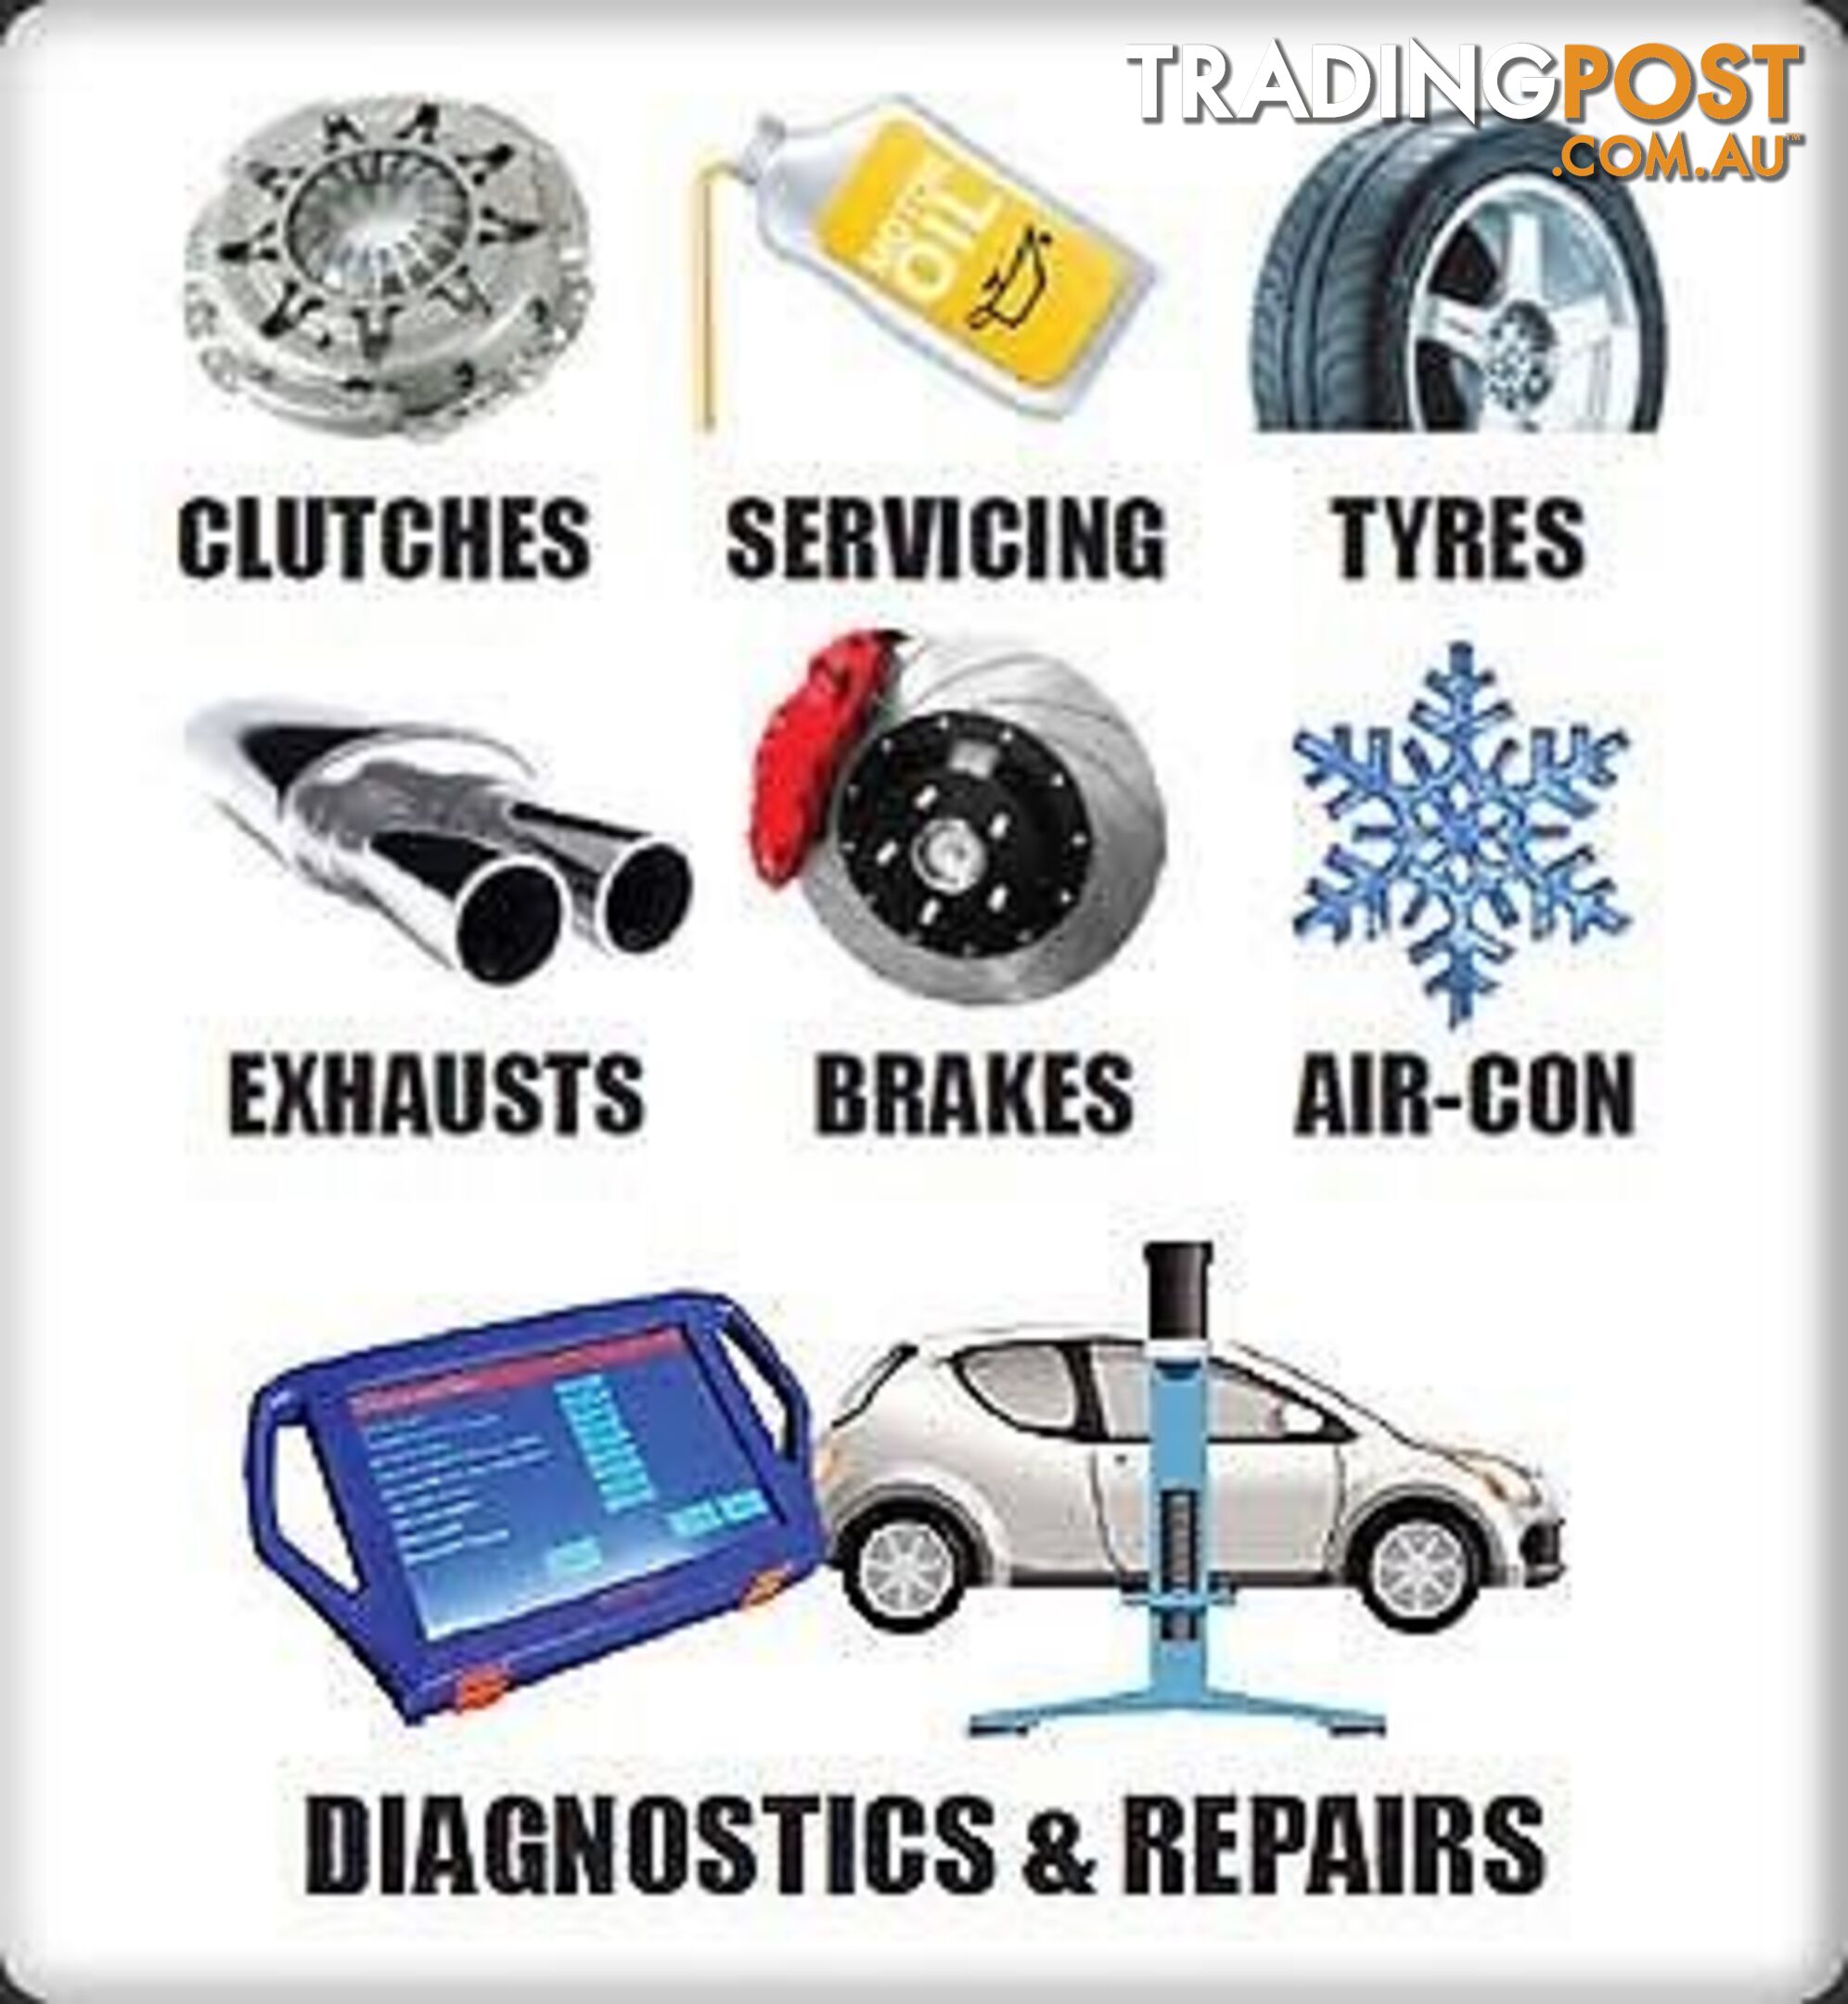 CANBERRA CAR DOCTOR 24/7 - We Come to You Anytime